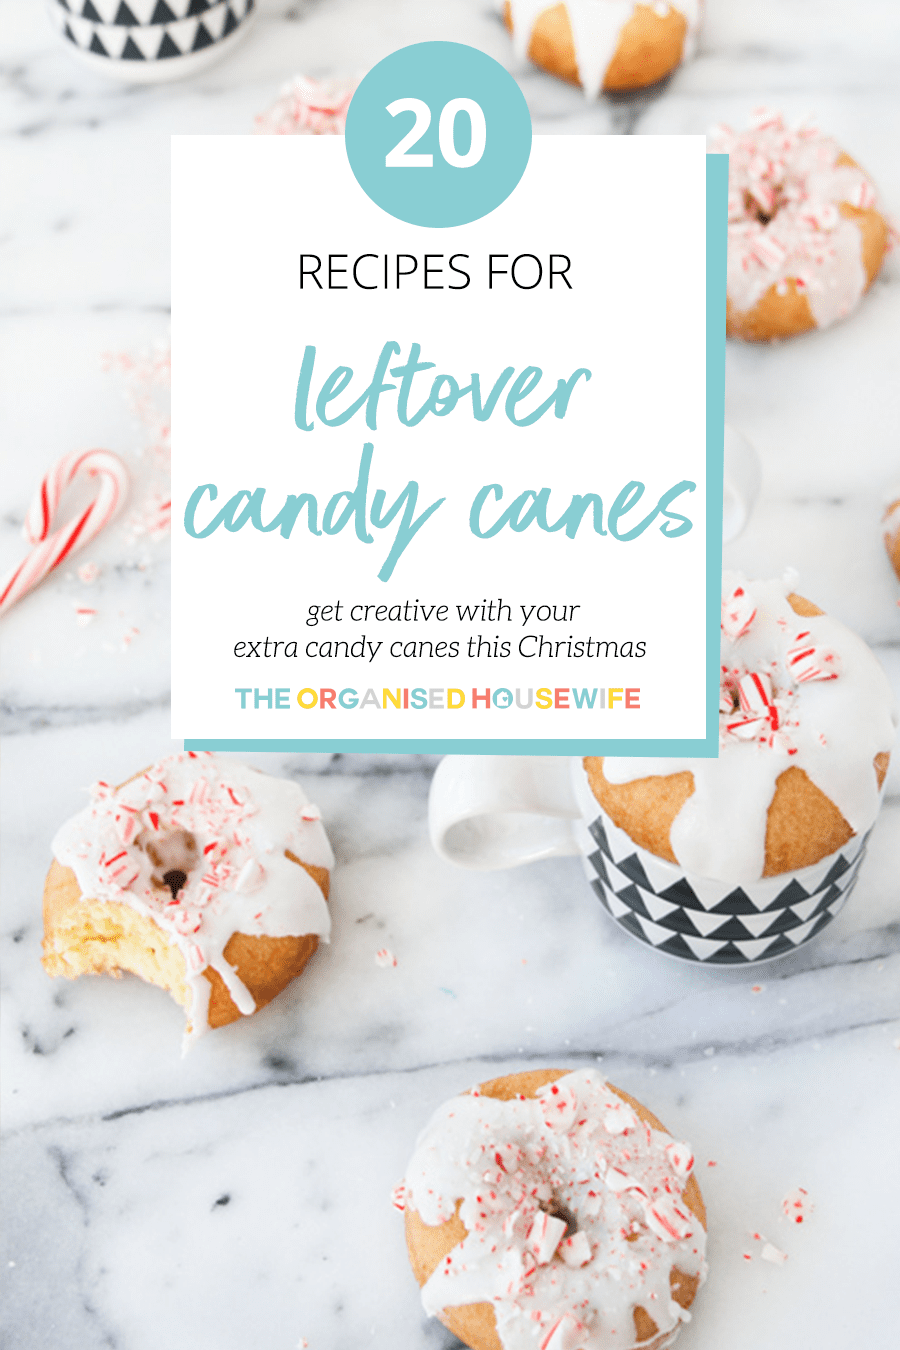 20 Clever Recipes For Leftover Candy Canes The Organised Housewife